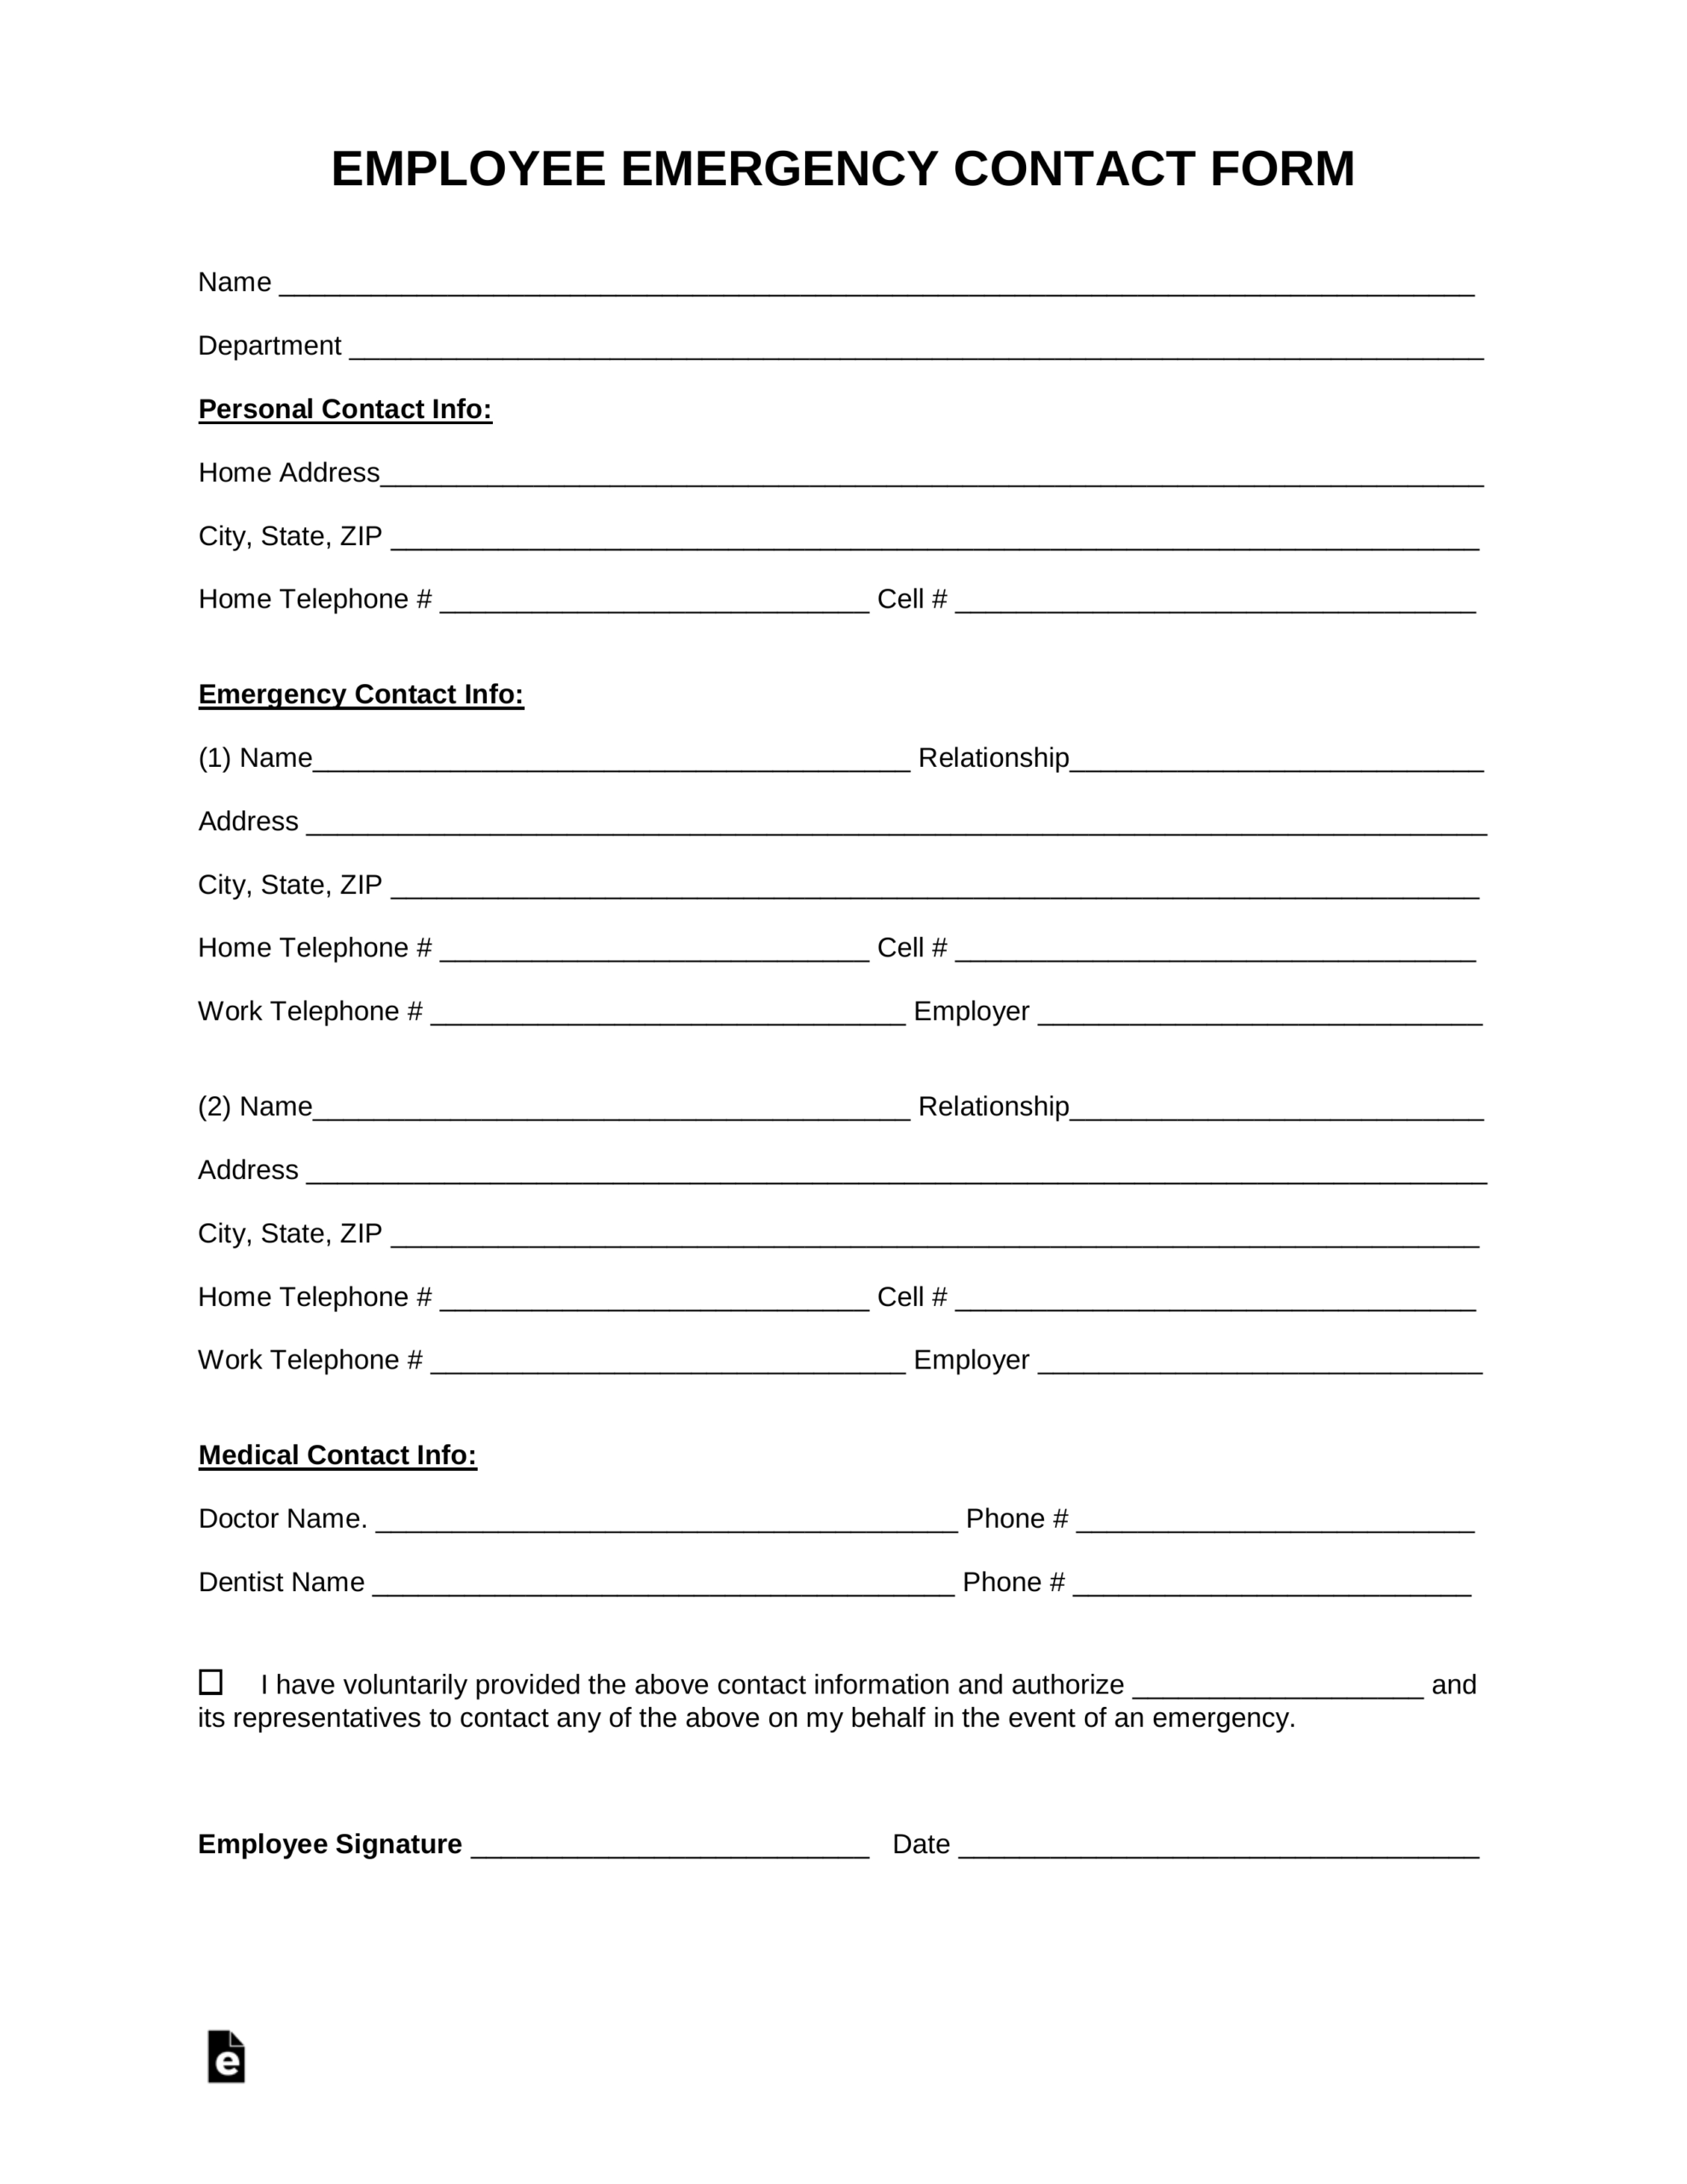 Free Employee Emergency Contact Form – Pdf | Word | Eforms Regarding Emergency Contact Card Template